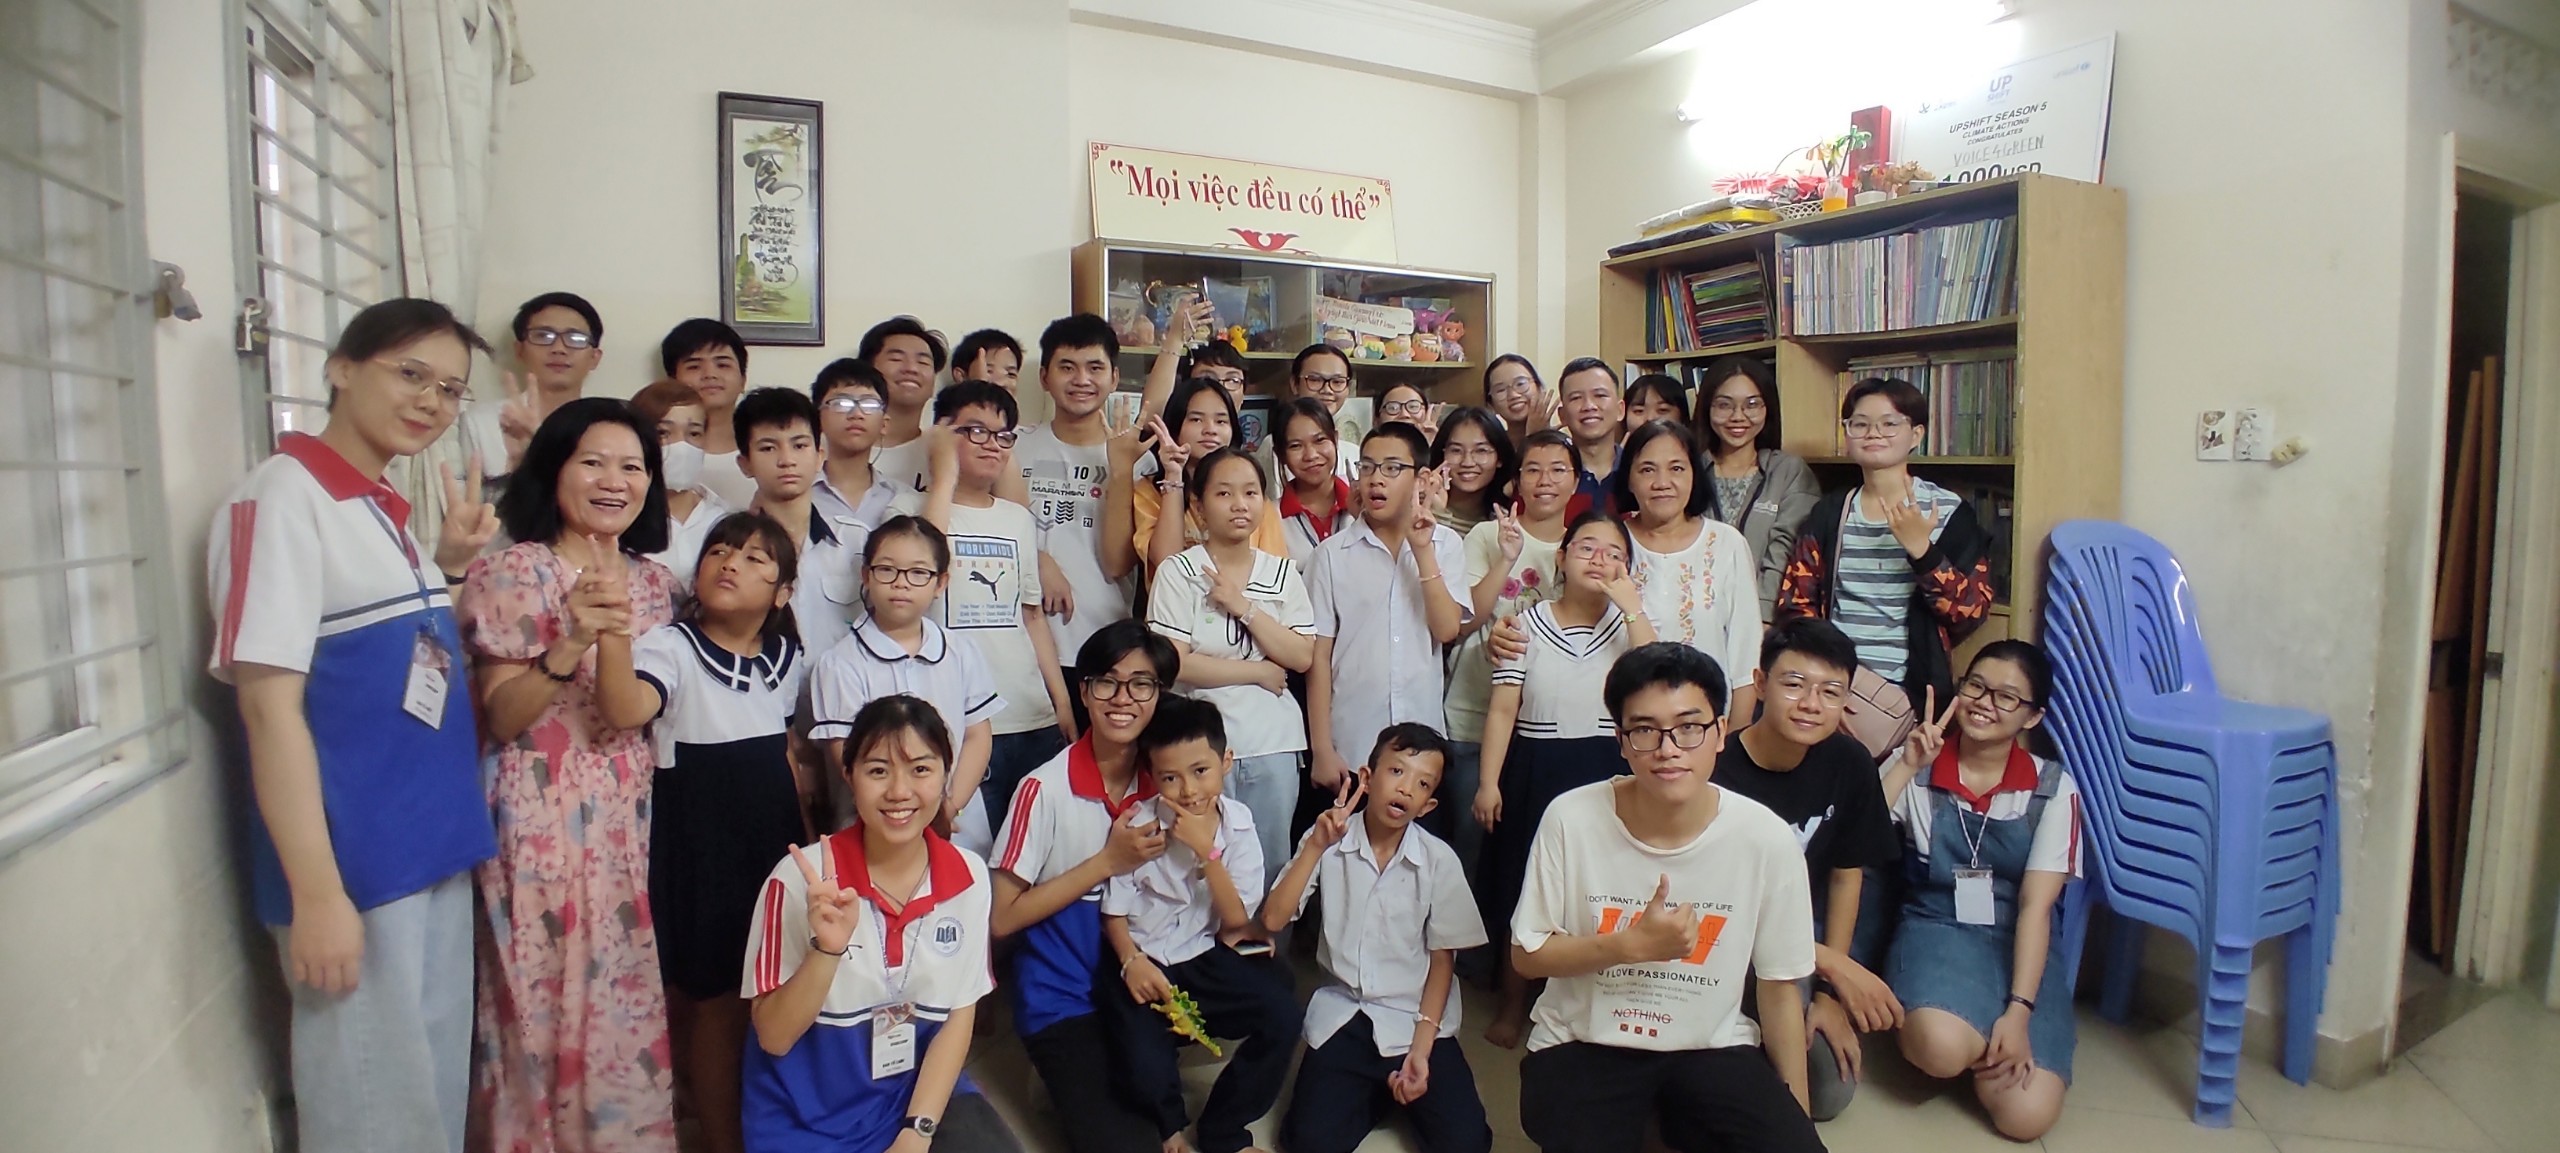 EXCHANGE WITH STUDENTS OF THE HO CHI MINH CITY UNIVERSITY OF ECONOMY